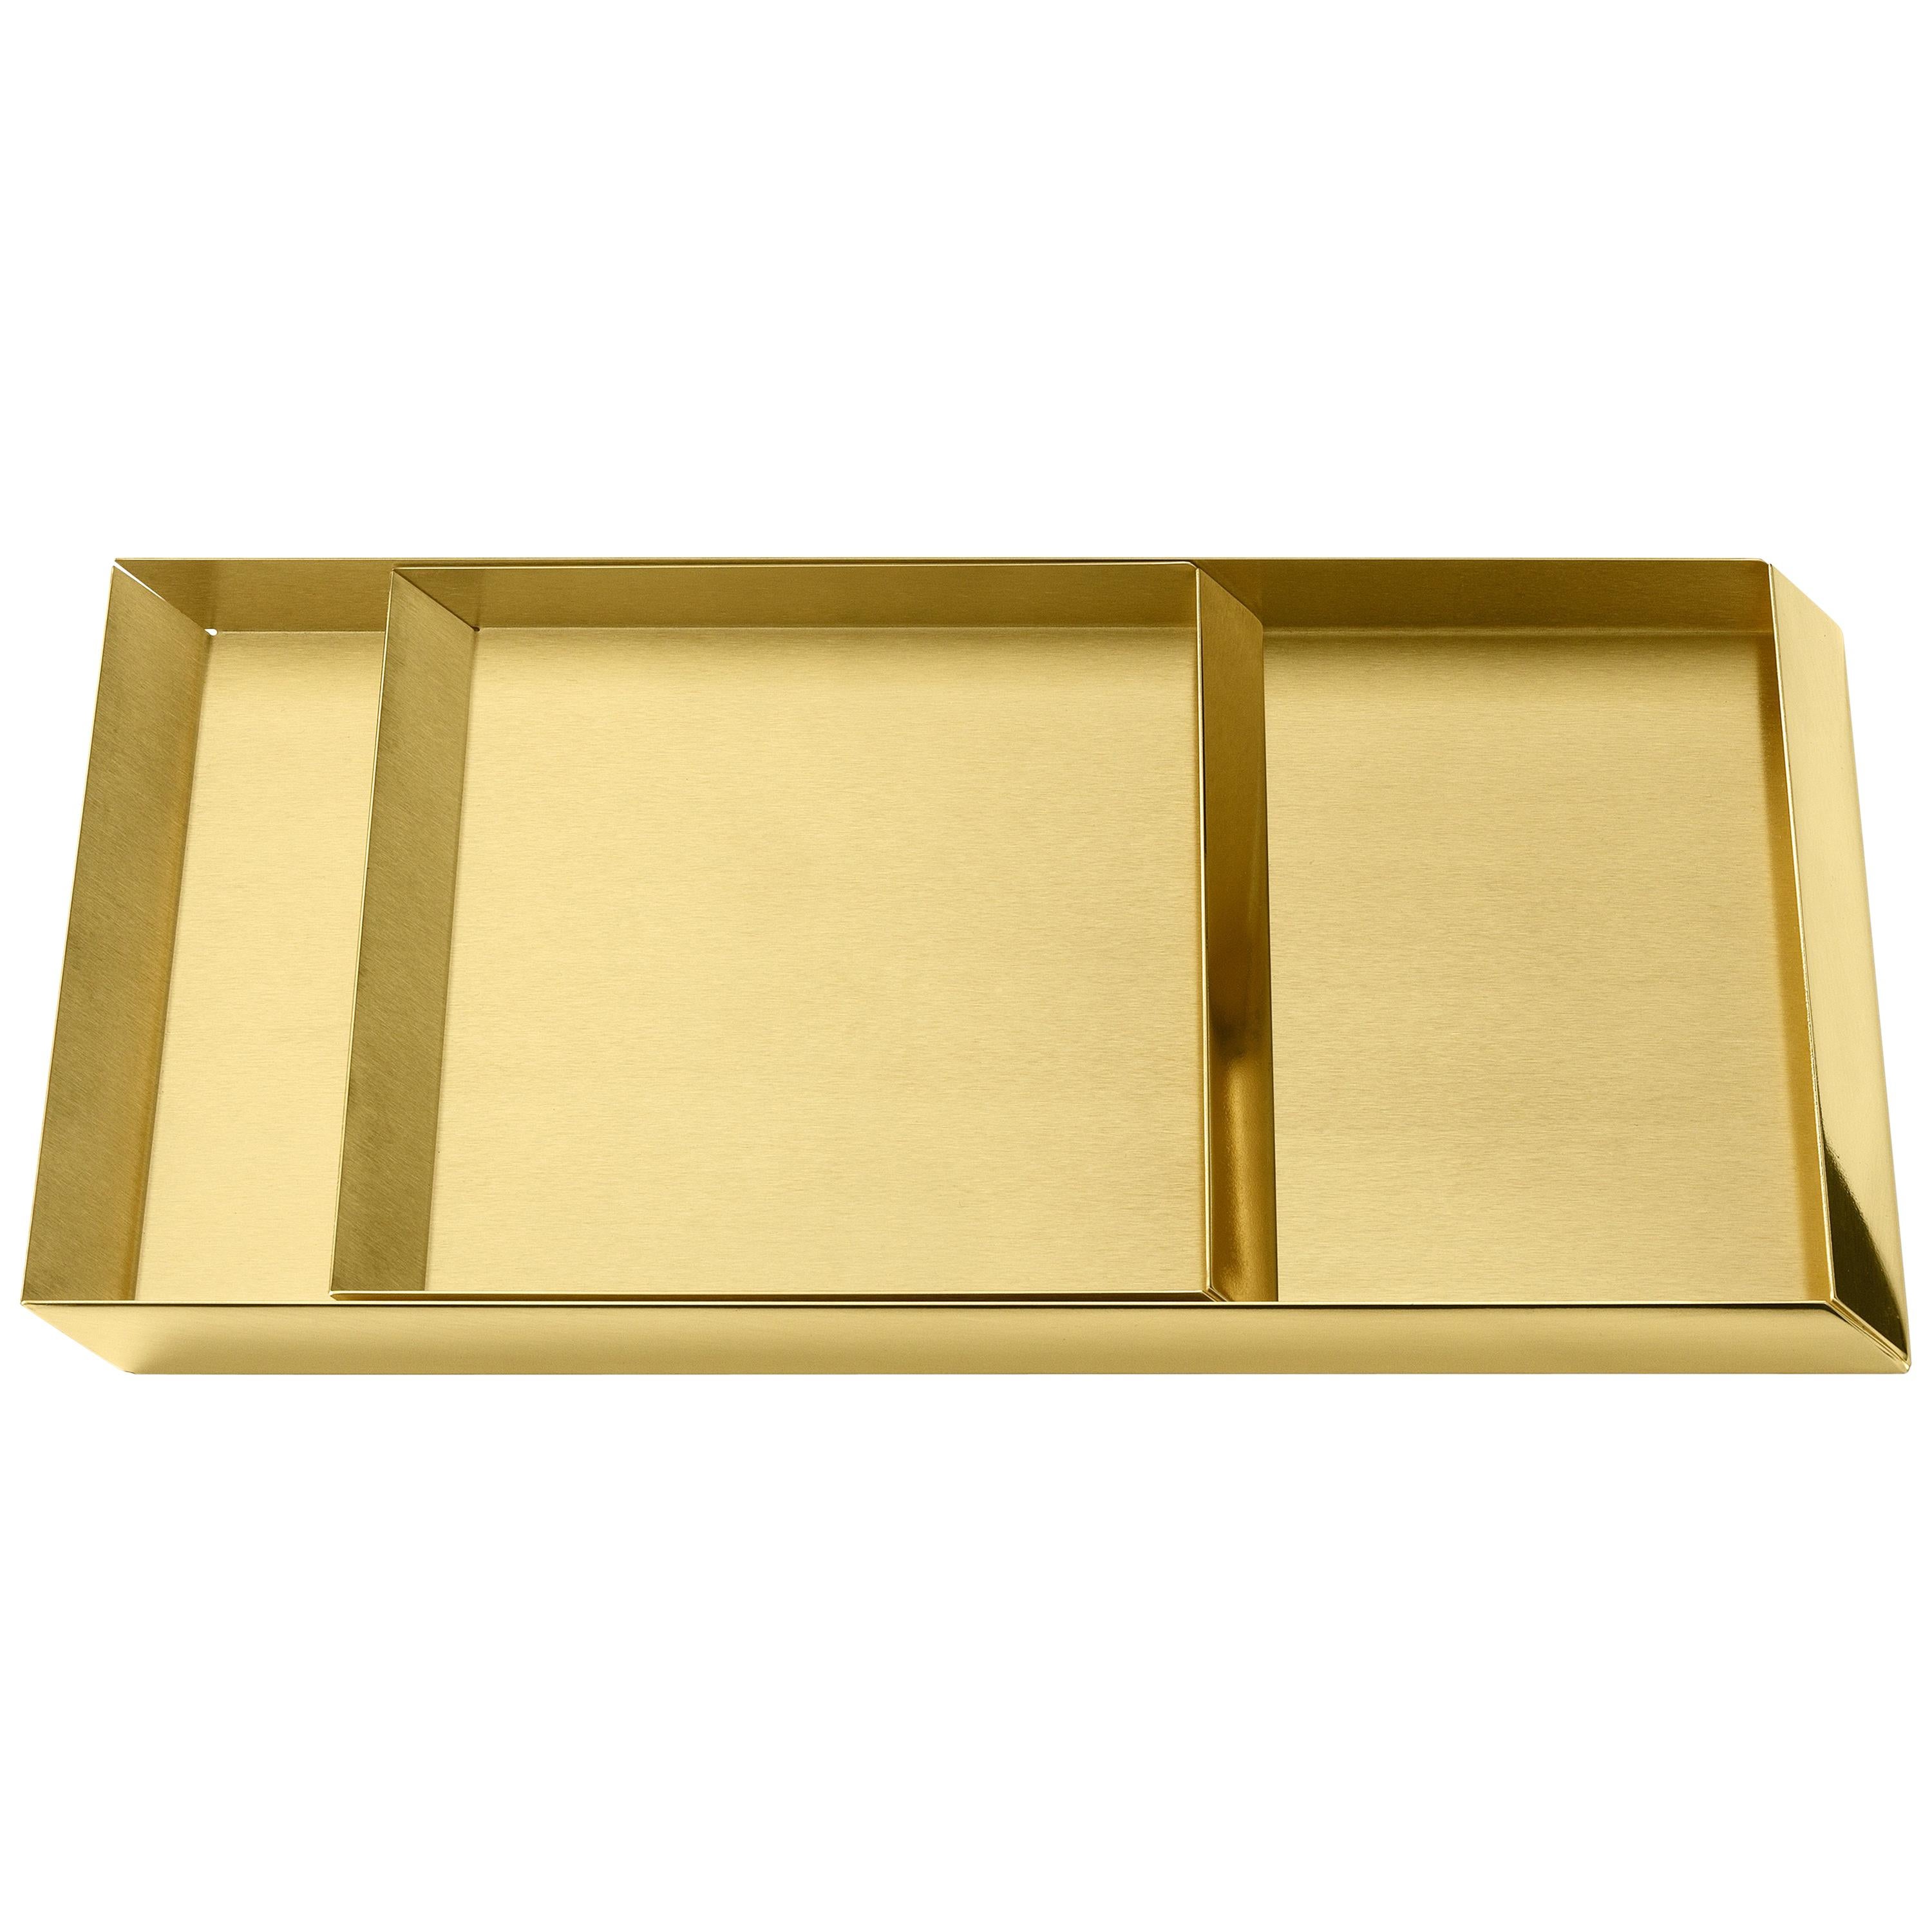 'Set of 2' Ghidini 1961 Axonometry Trays in Brass by Elisa Giovanni